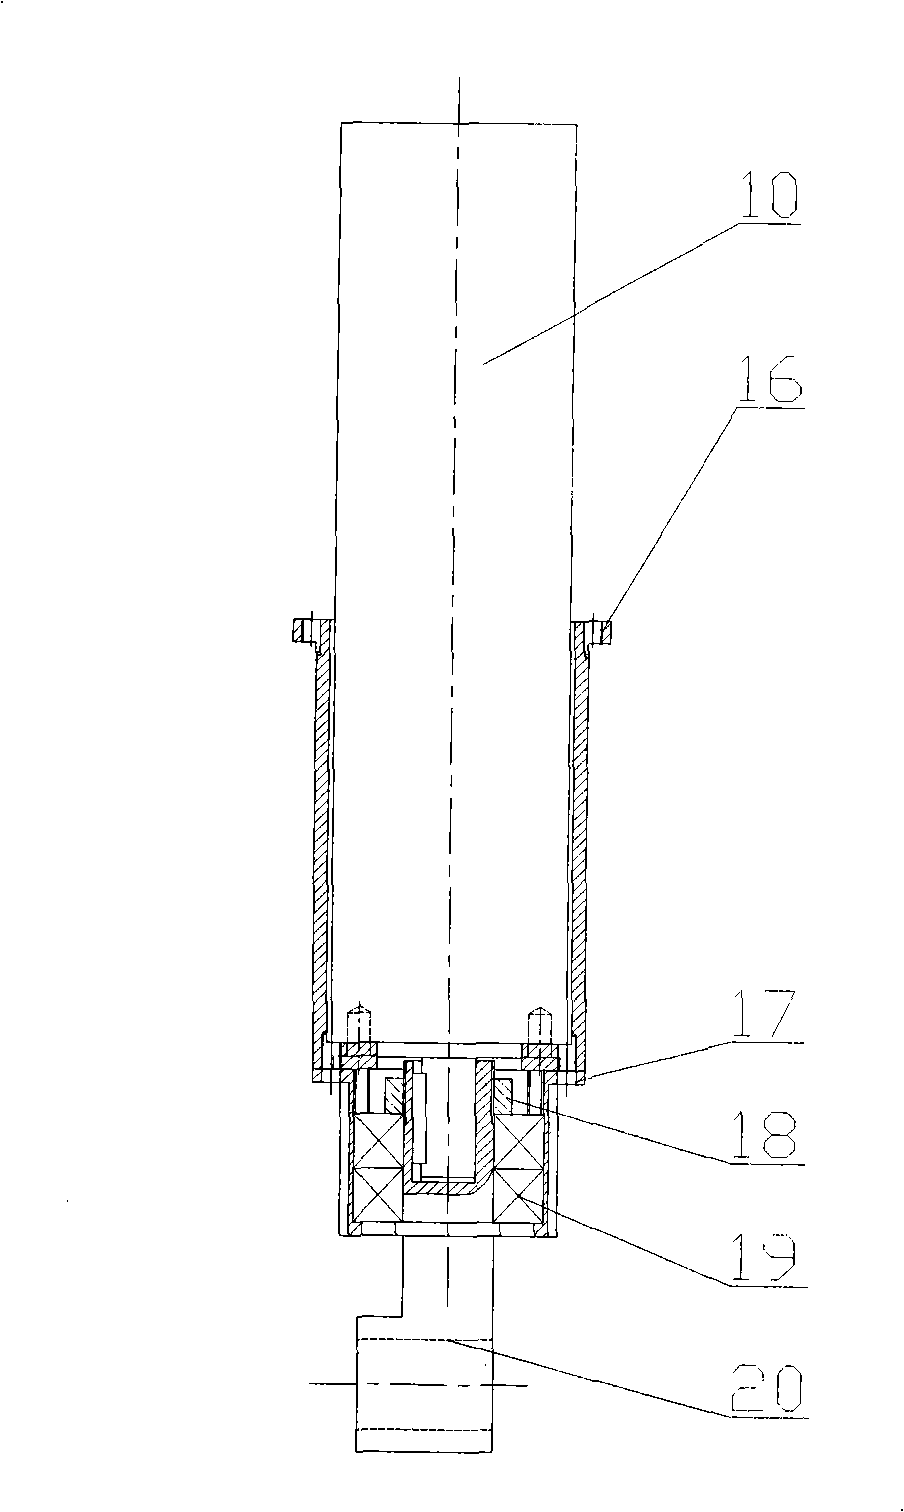 Active-passive combined swinging arm type rhombic lunar rover moving system